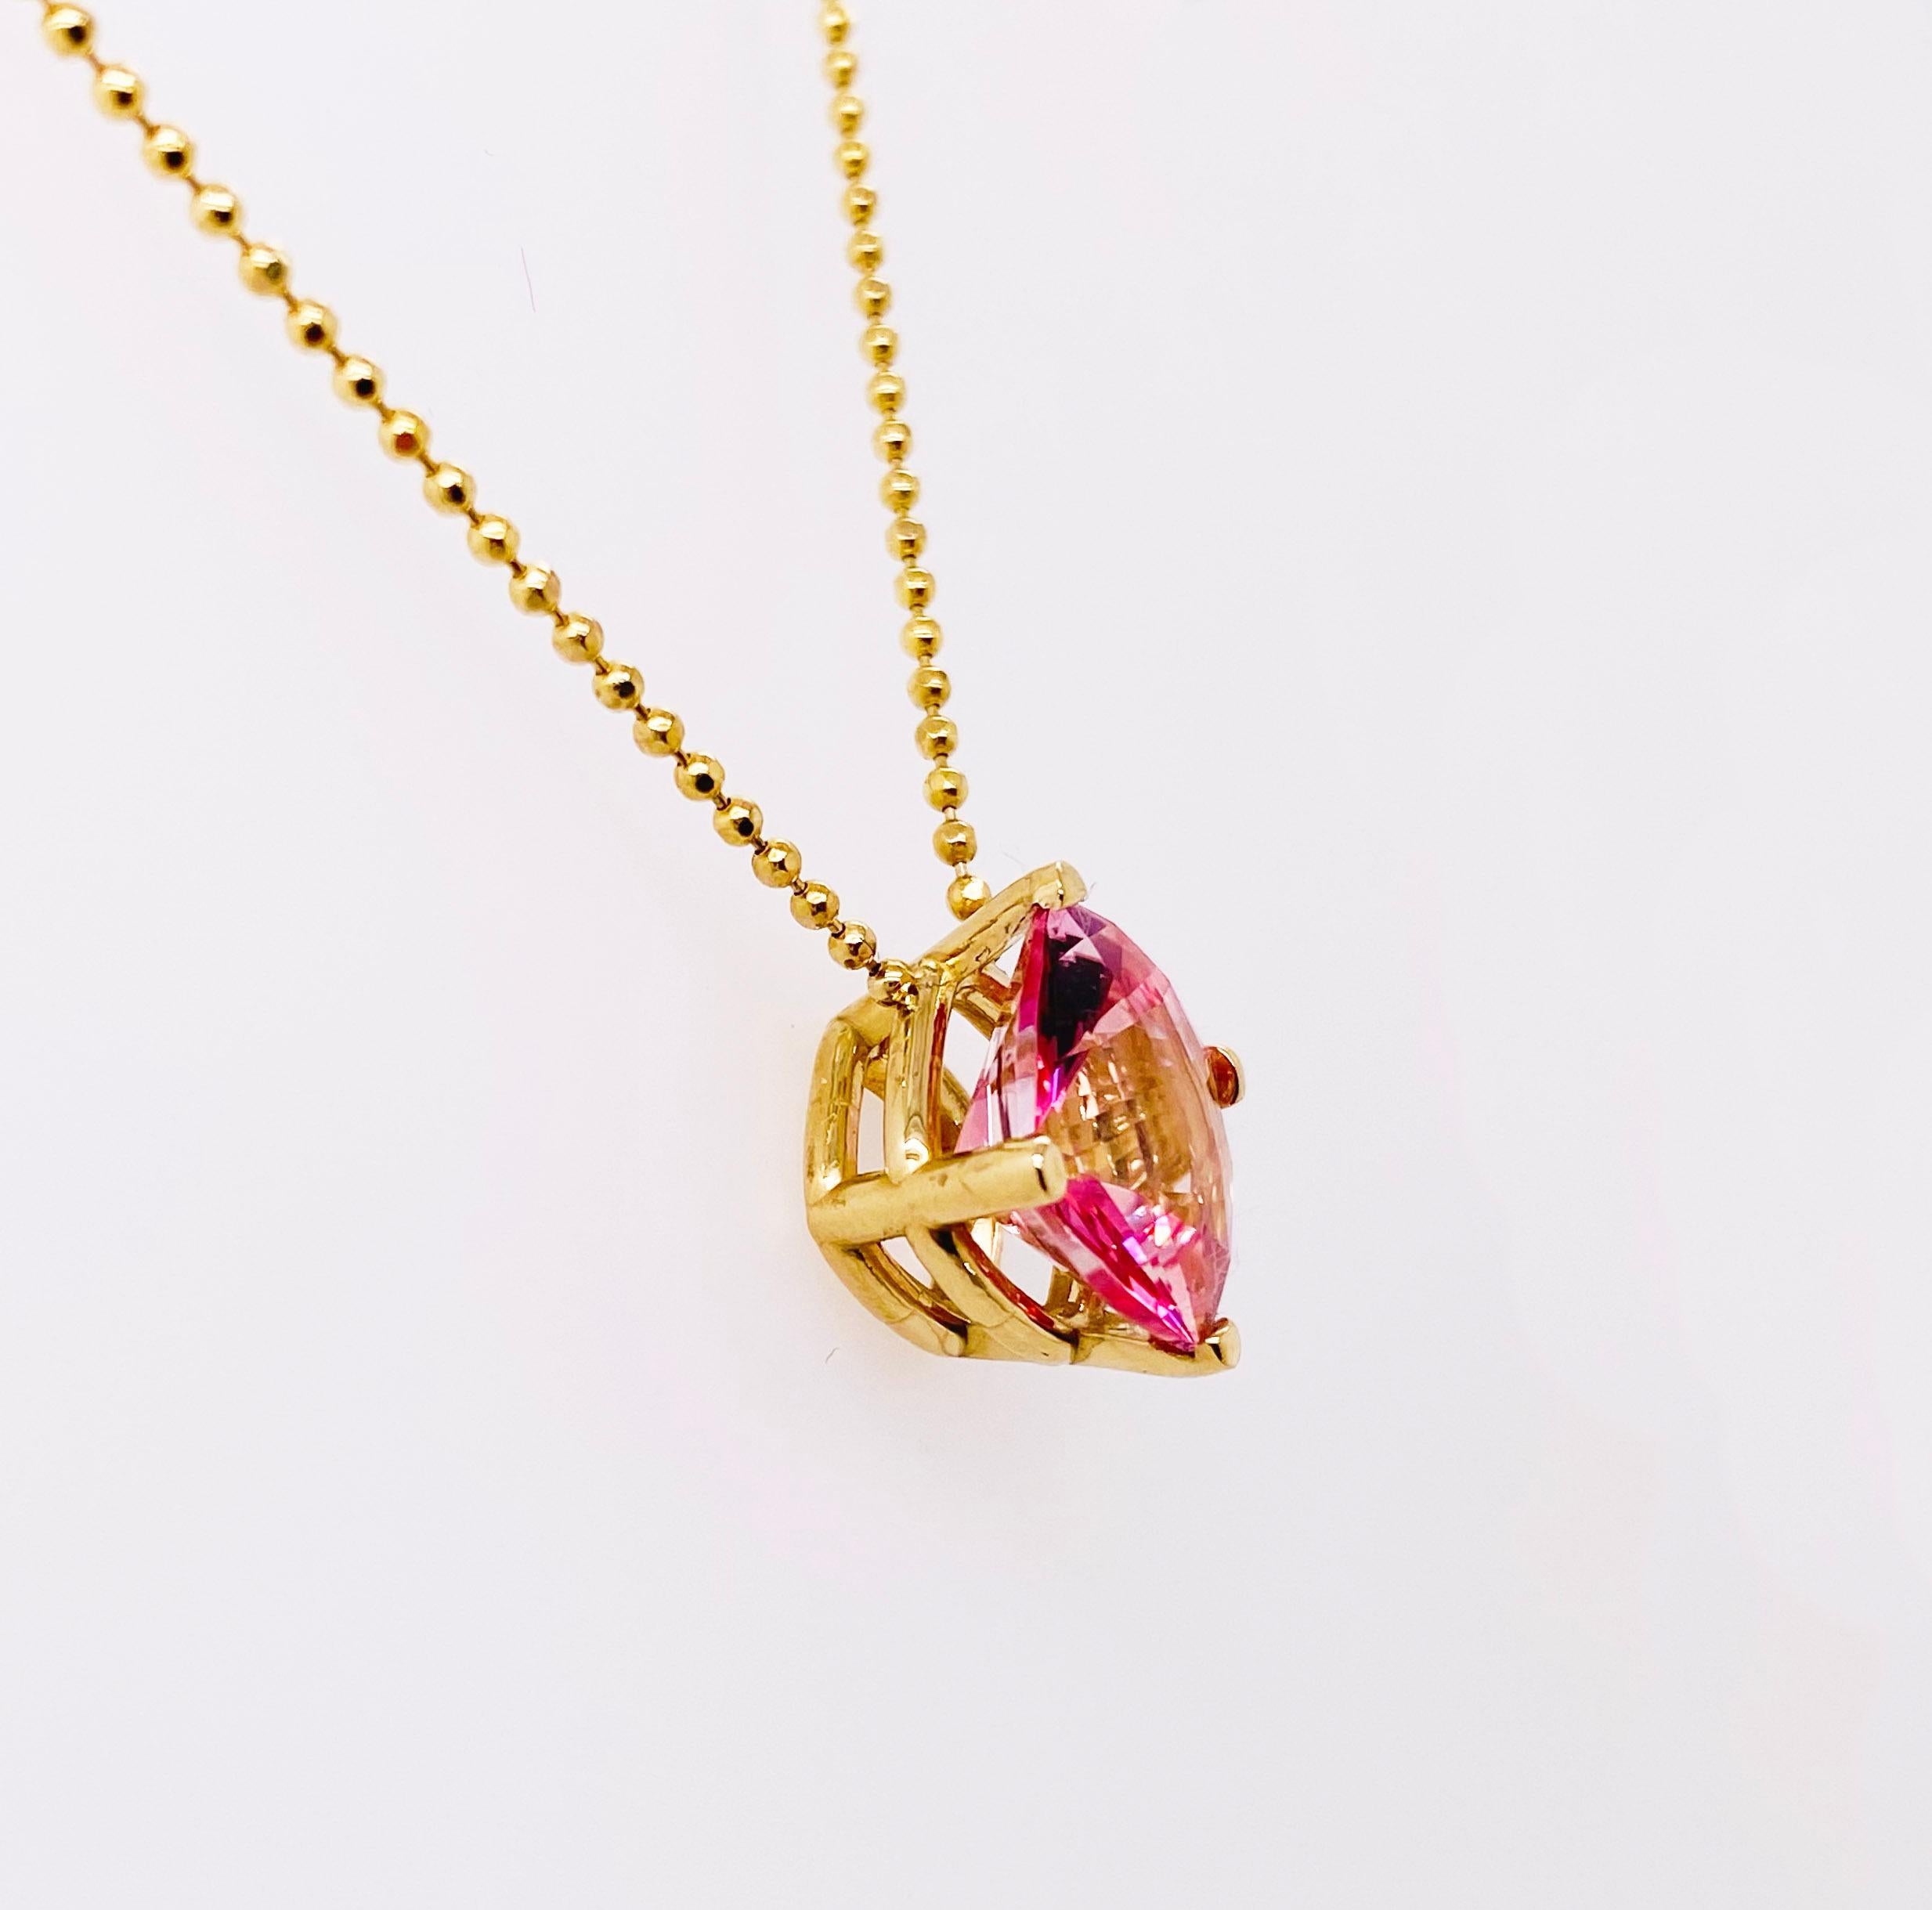 This beautiful pink topaz that has been carefully cut into a cushion cut gemstone is both natural and genuine. This is not a imitation or synthetic stone. The color is vibrant and will make any pink lover happy! The gemstone is set perfectly in a